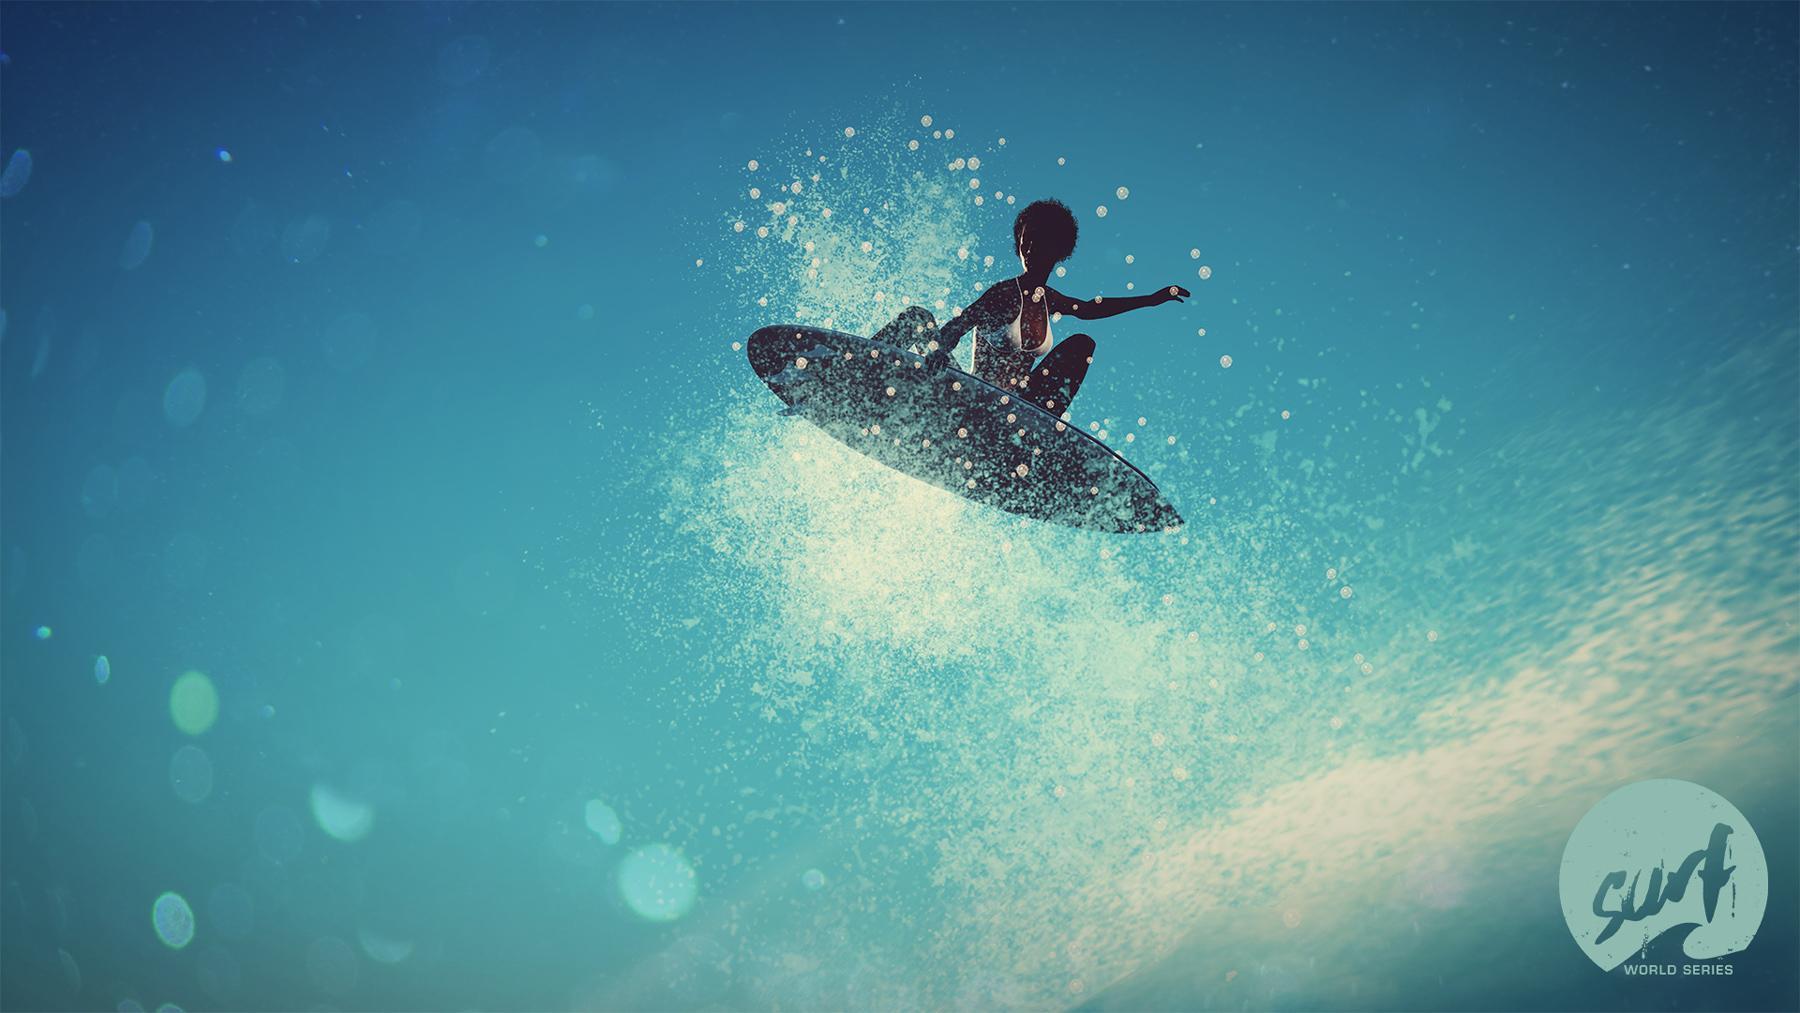 It Isn’t Every Decade A New Surfing Video Game Is Announced